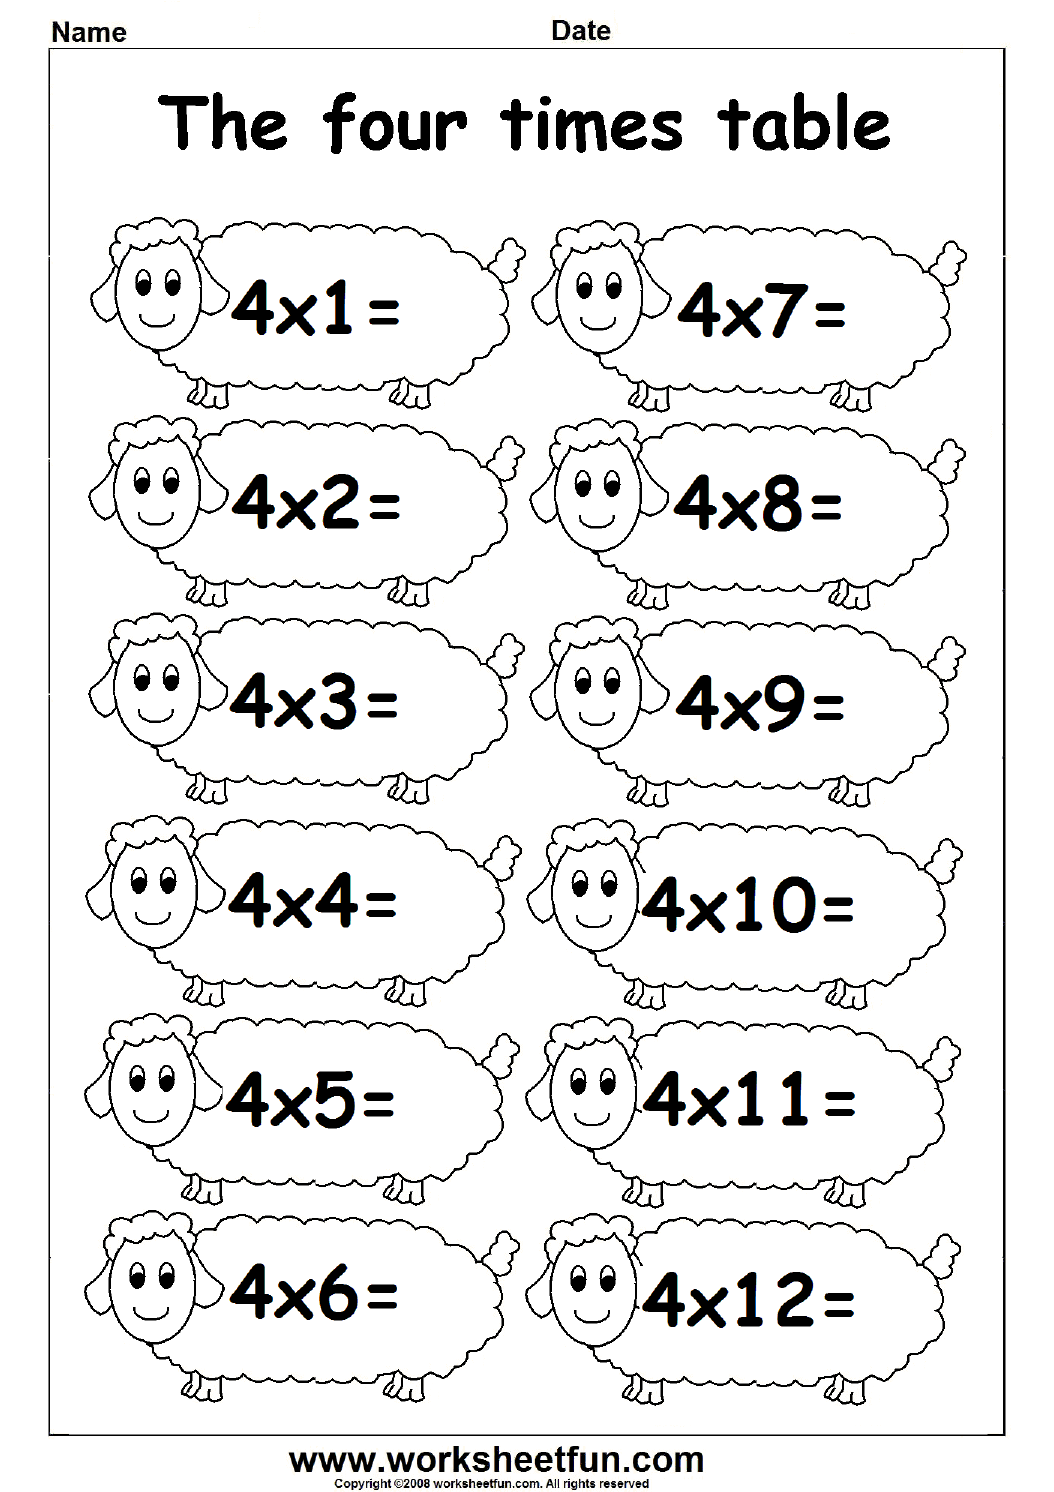 Multiplication Times Tables Worksheets 2 3 4 Times Tables Three Worksheets FREE Printable Worksheets Worksheetfun